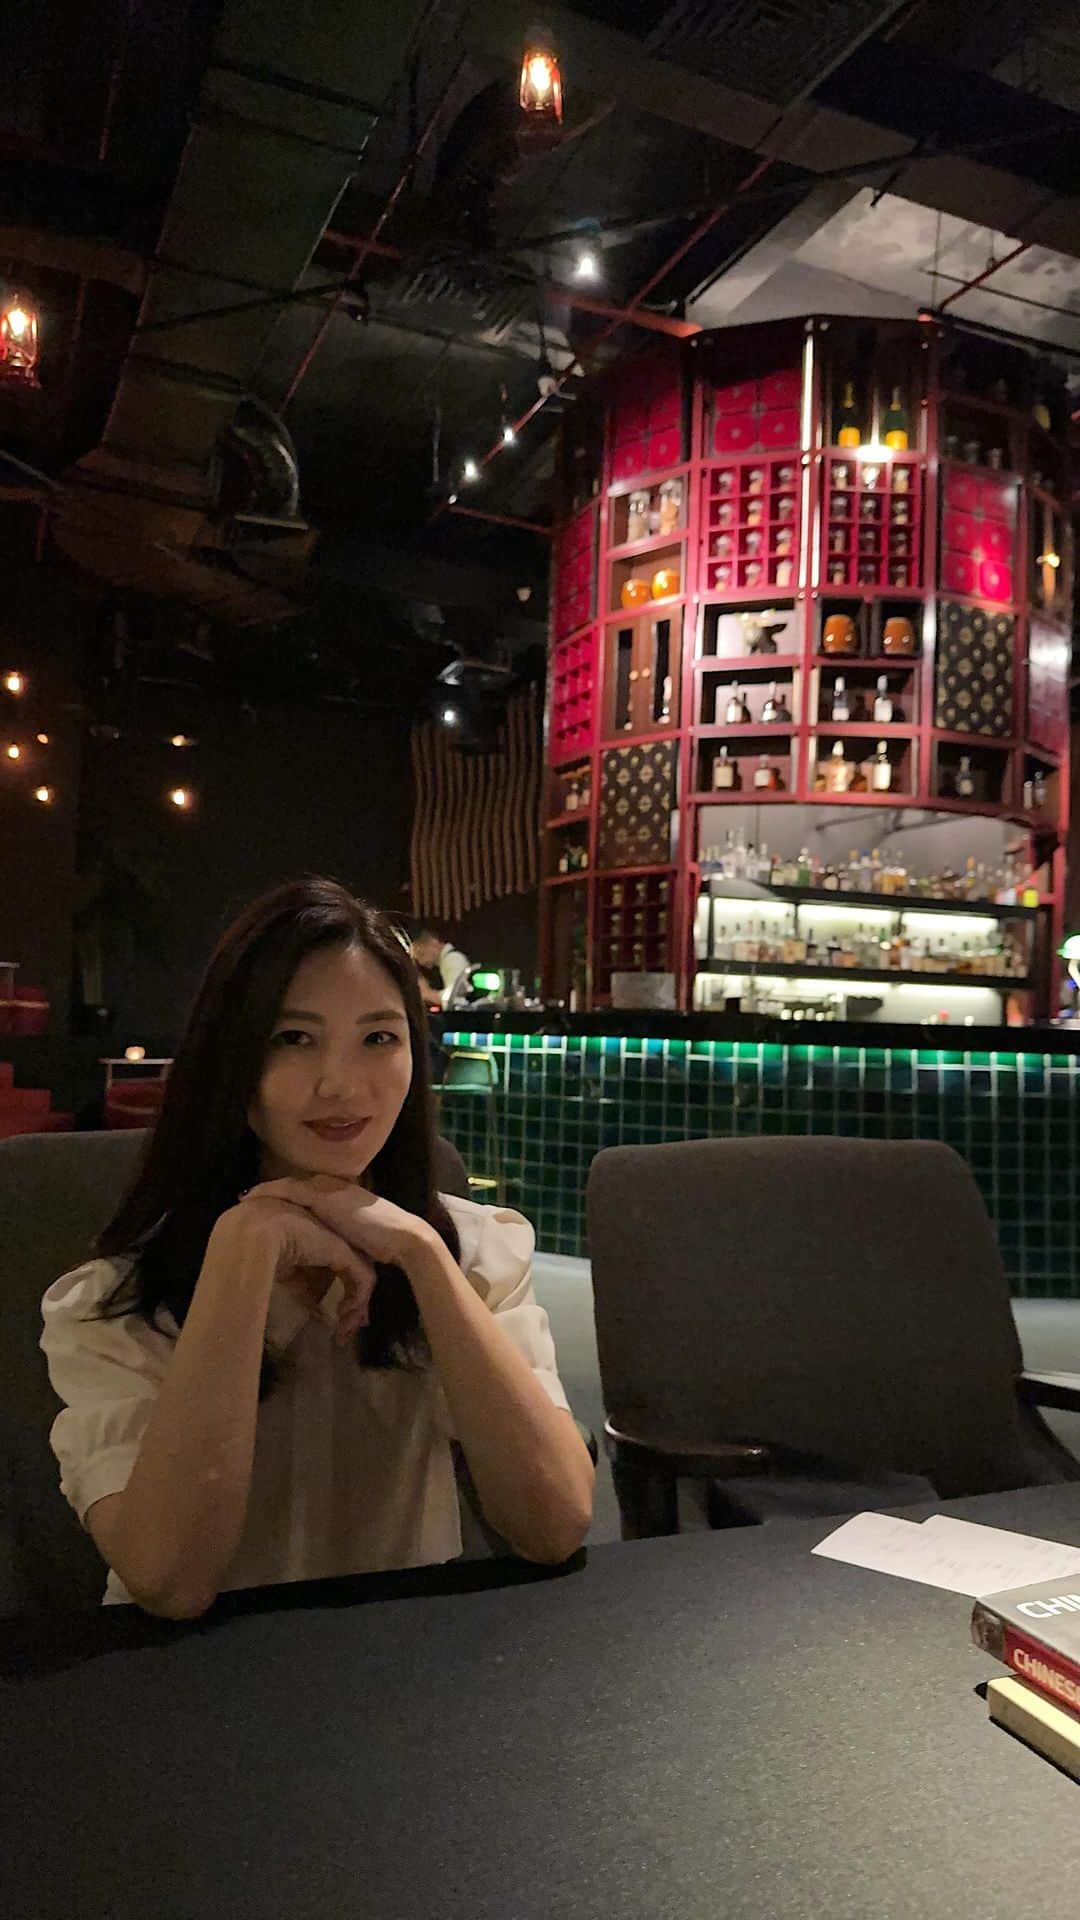 Samantha Leeのインスタグラム：「Dined at @beta.kl where Malaysian flavors took center stage. A culinary masterpiece that recently earned its first Michelin star. Had the honor of chatting with Chef @raymondtham the genius behind the magic. Every dish spoke volumes, a true celebration of their well-deserved recognition.」